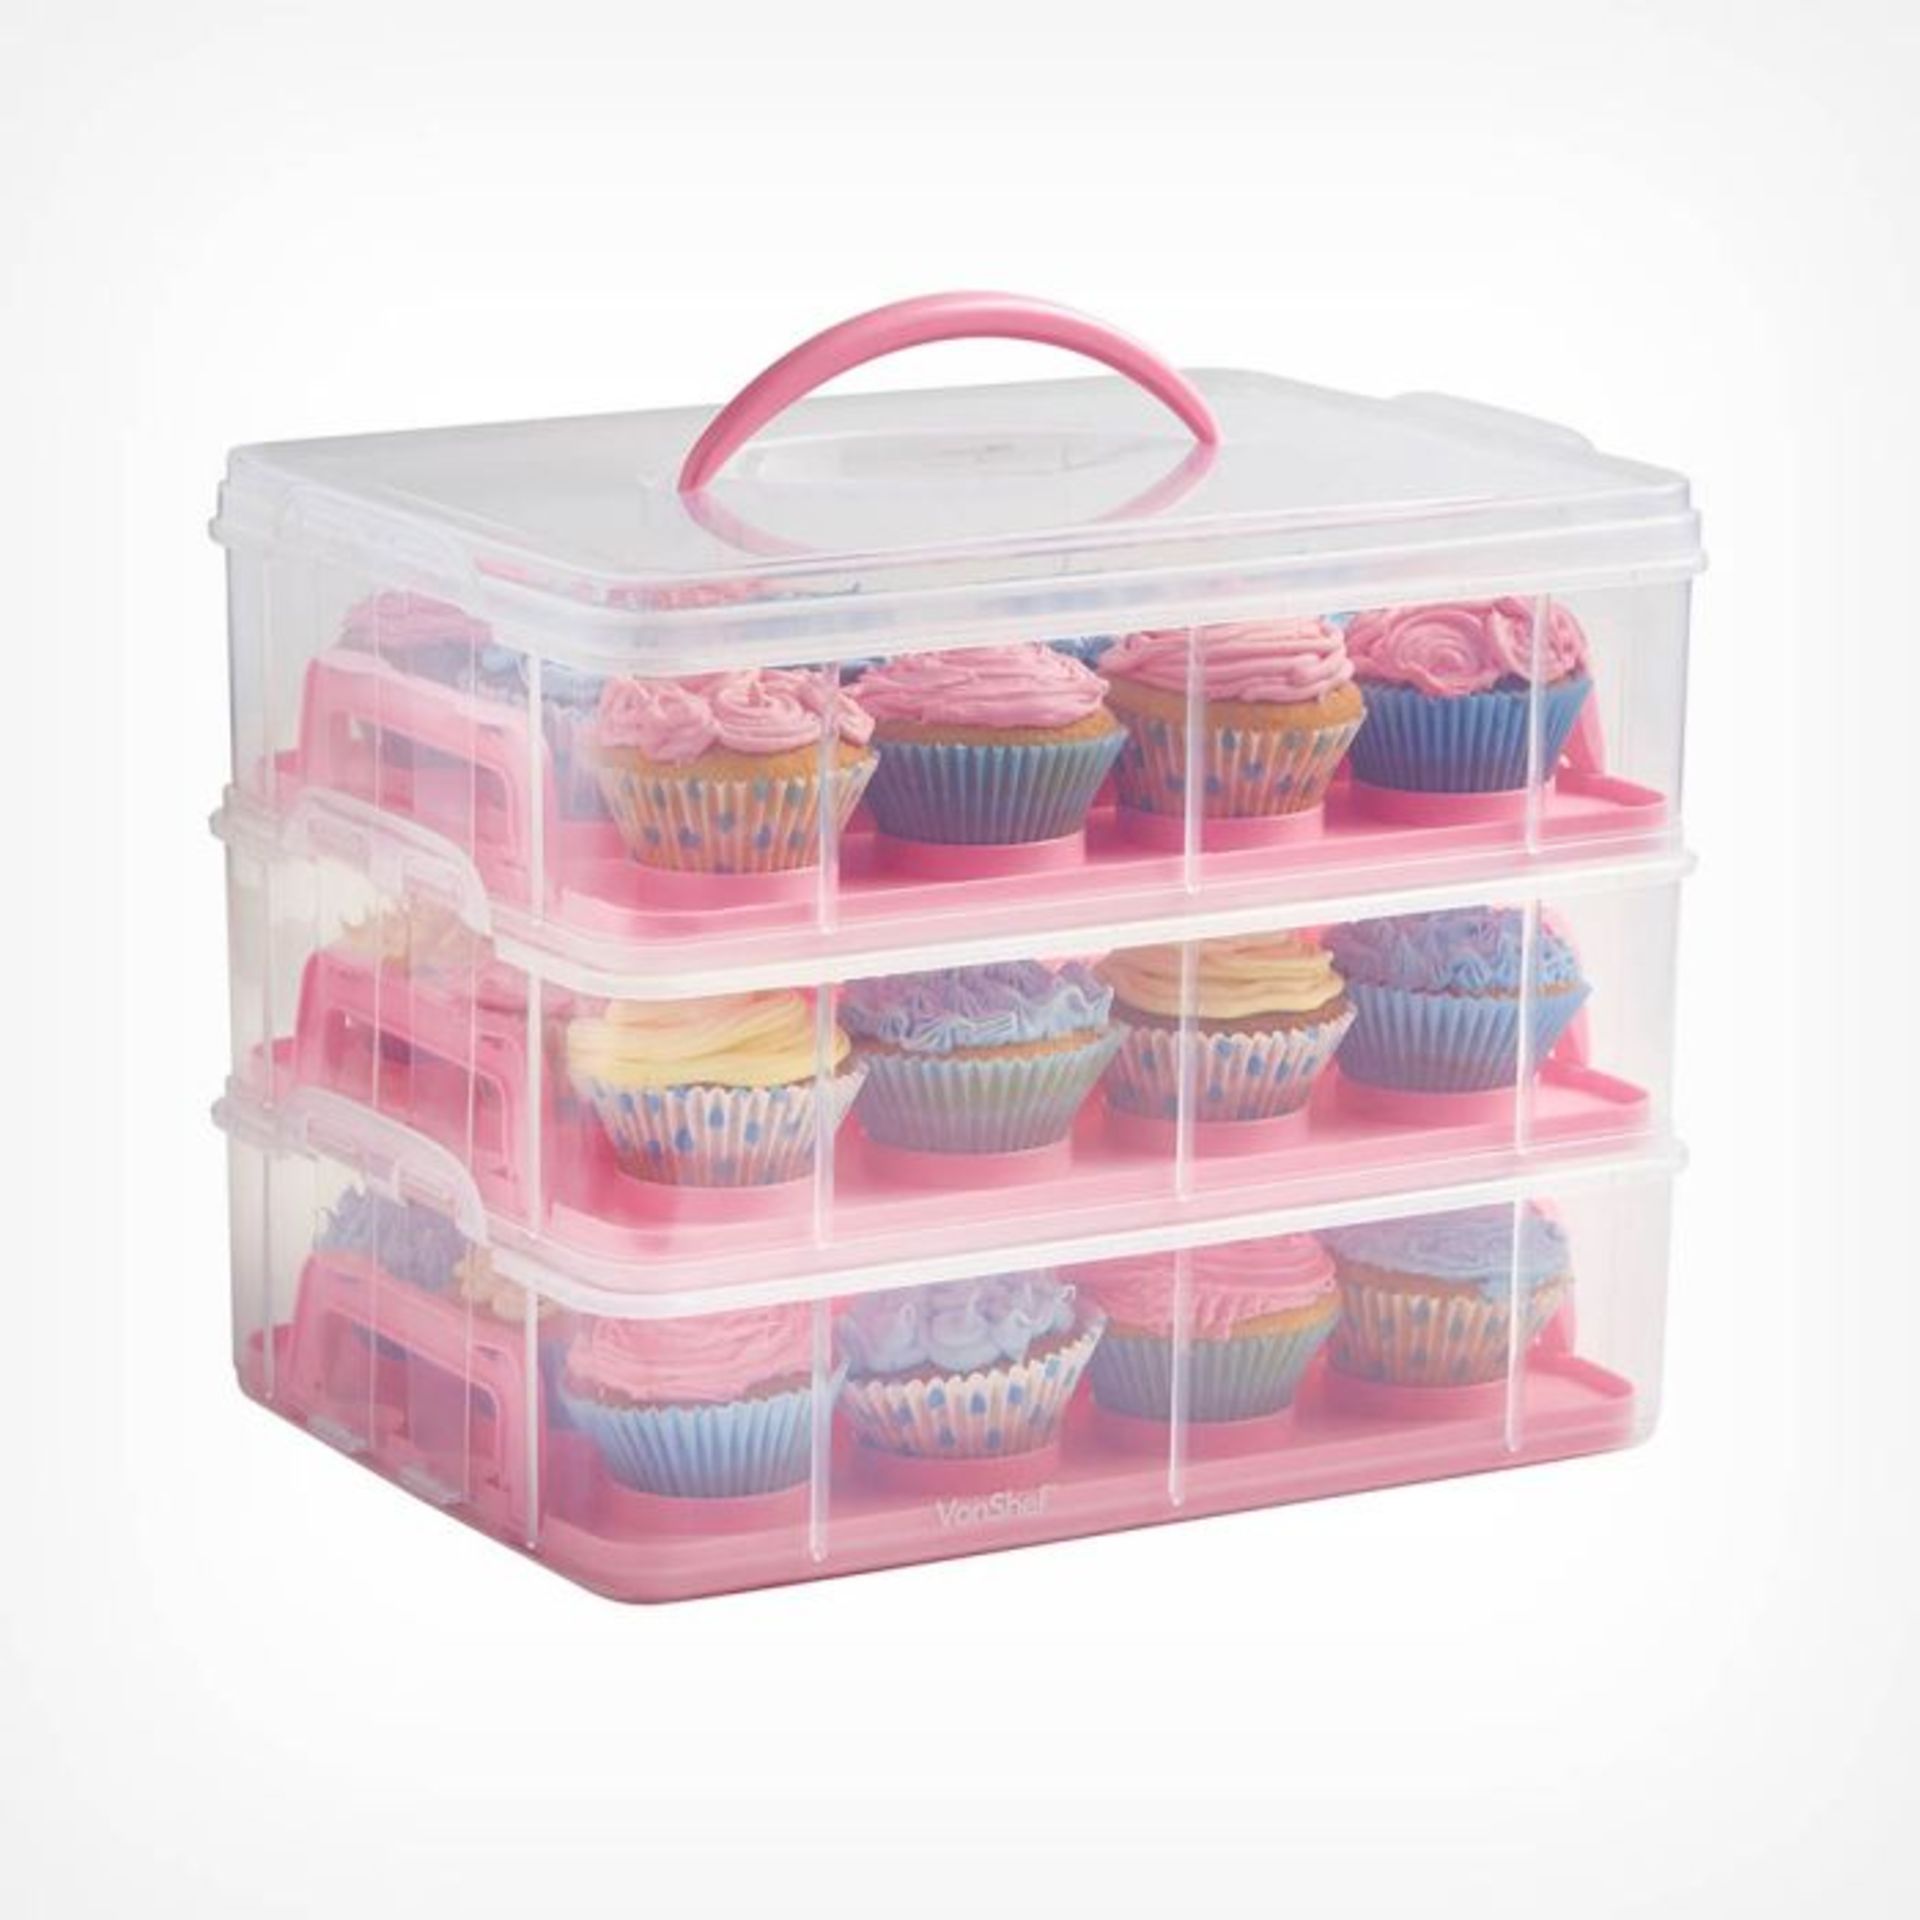 3 Tier Cupcake Carrier Pink. - S2.6. With this extremely handy carrier, you can store and